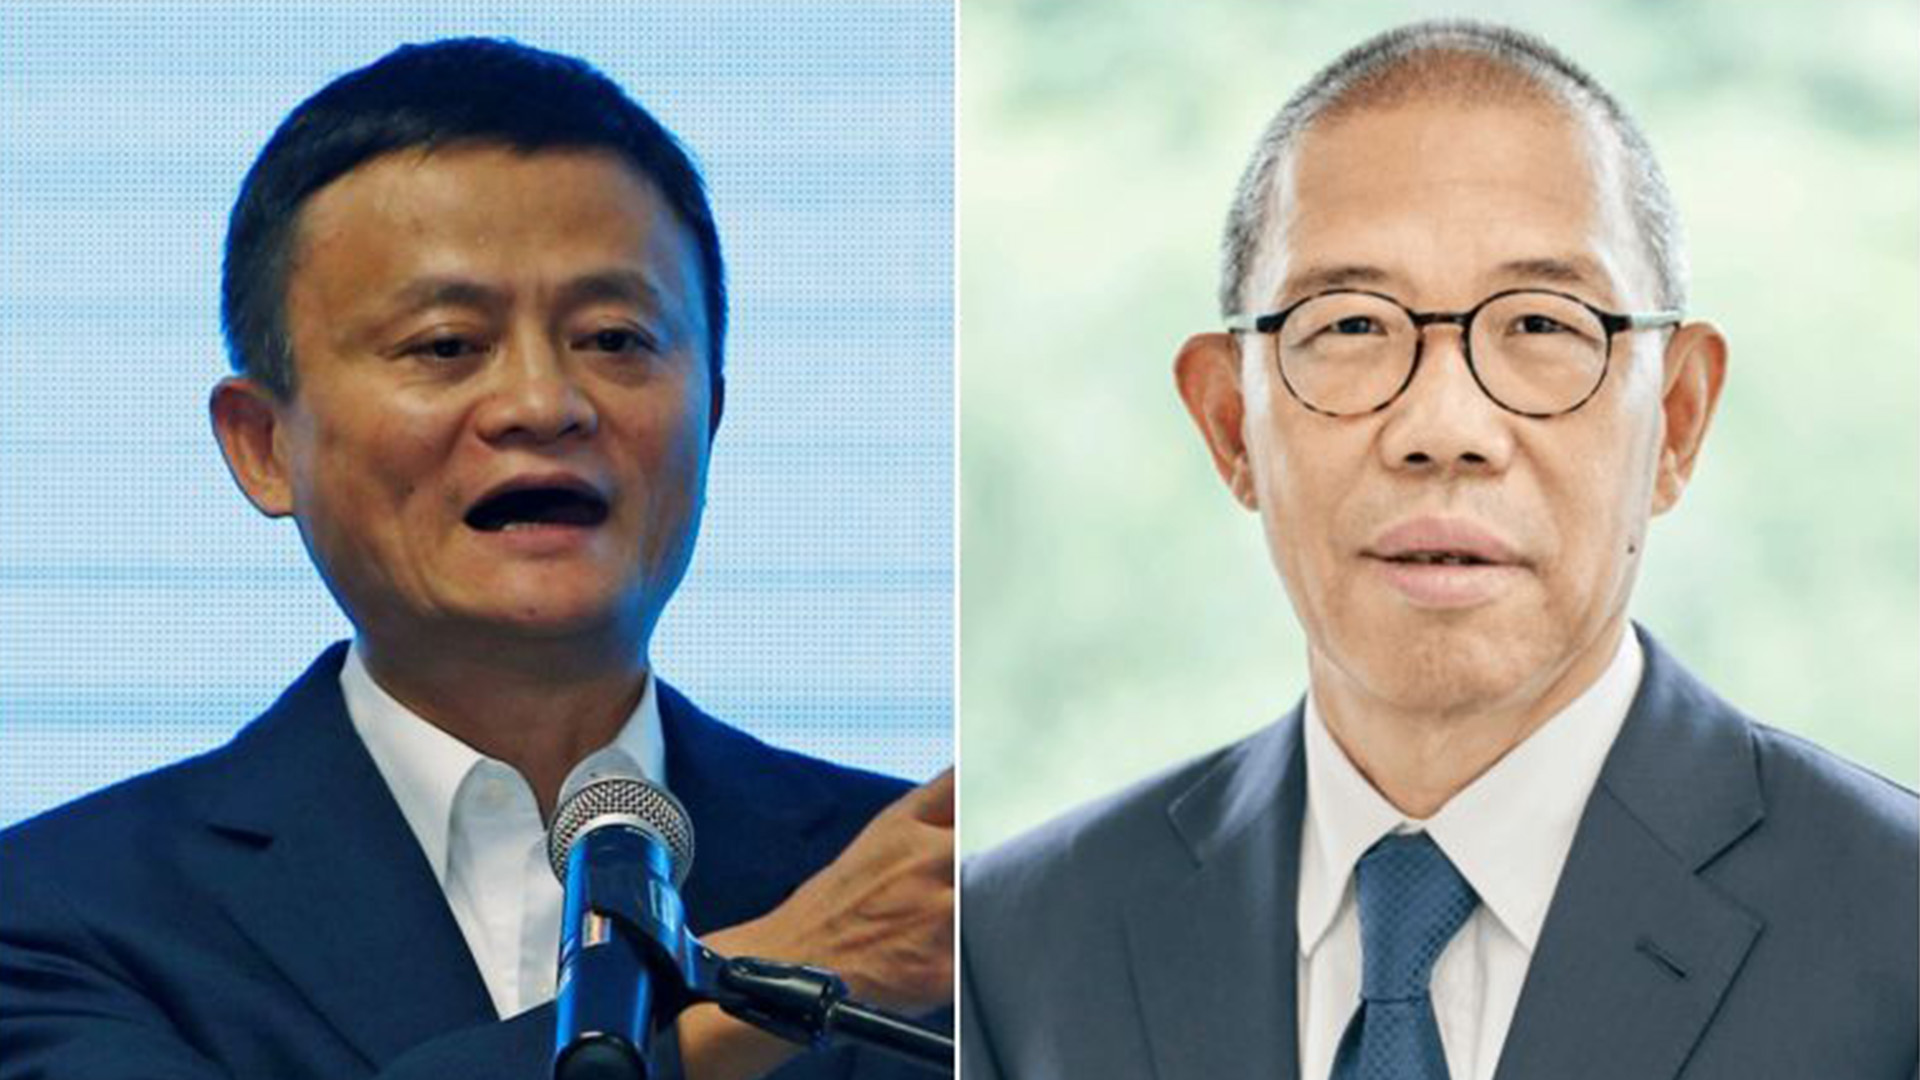 Bottled water and Vaccine tycoon Shanshan overtakes Jack Ma to become China's richest, second to Asia's wealthiest Ambani and 17th richest in the world